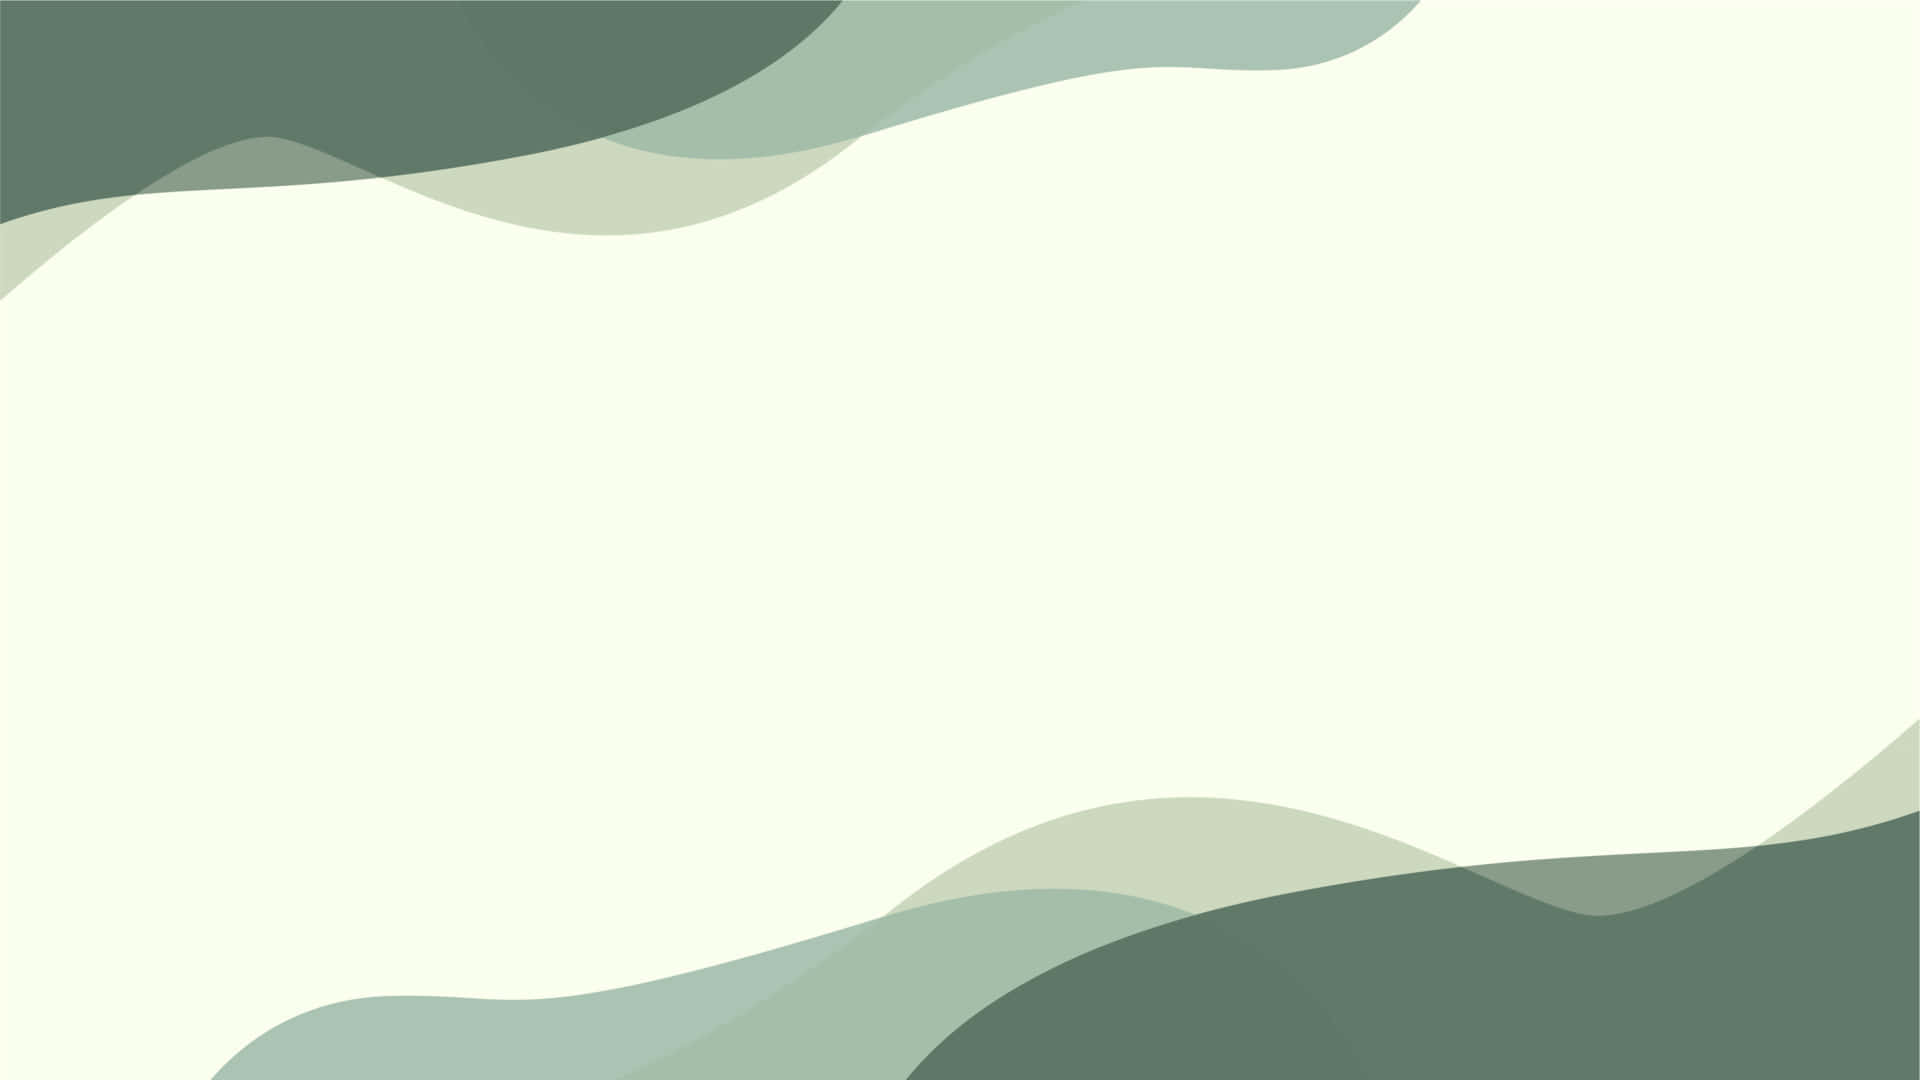 A Green And White Abstract Background With Waves